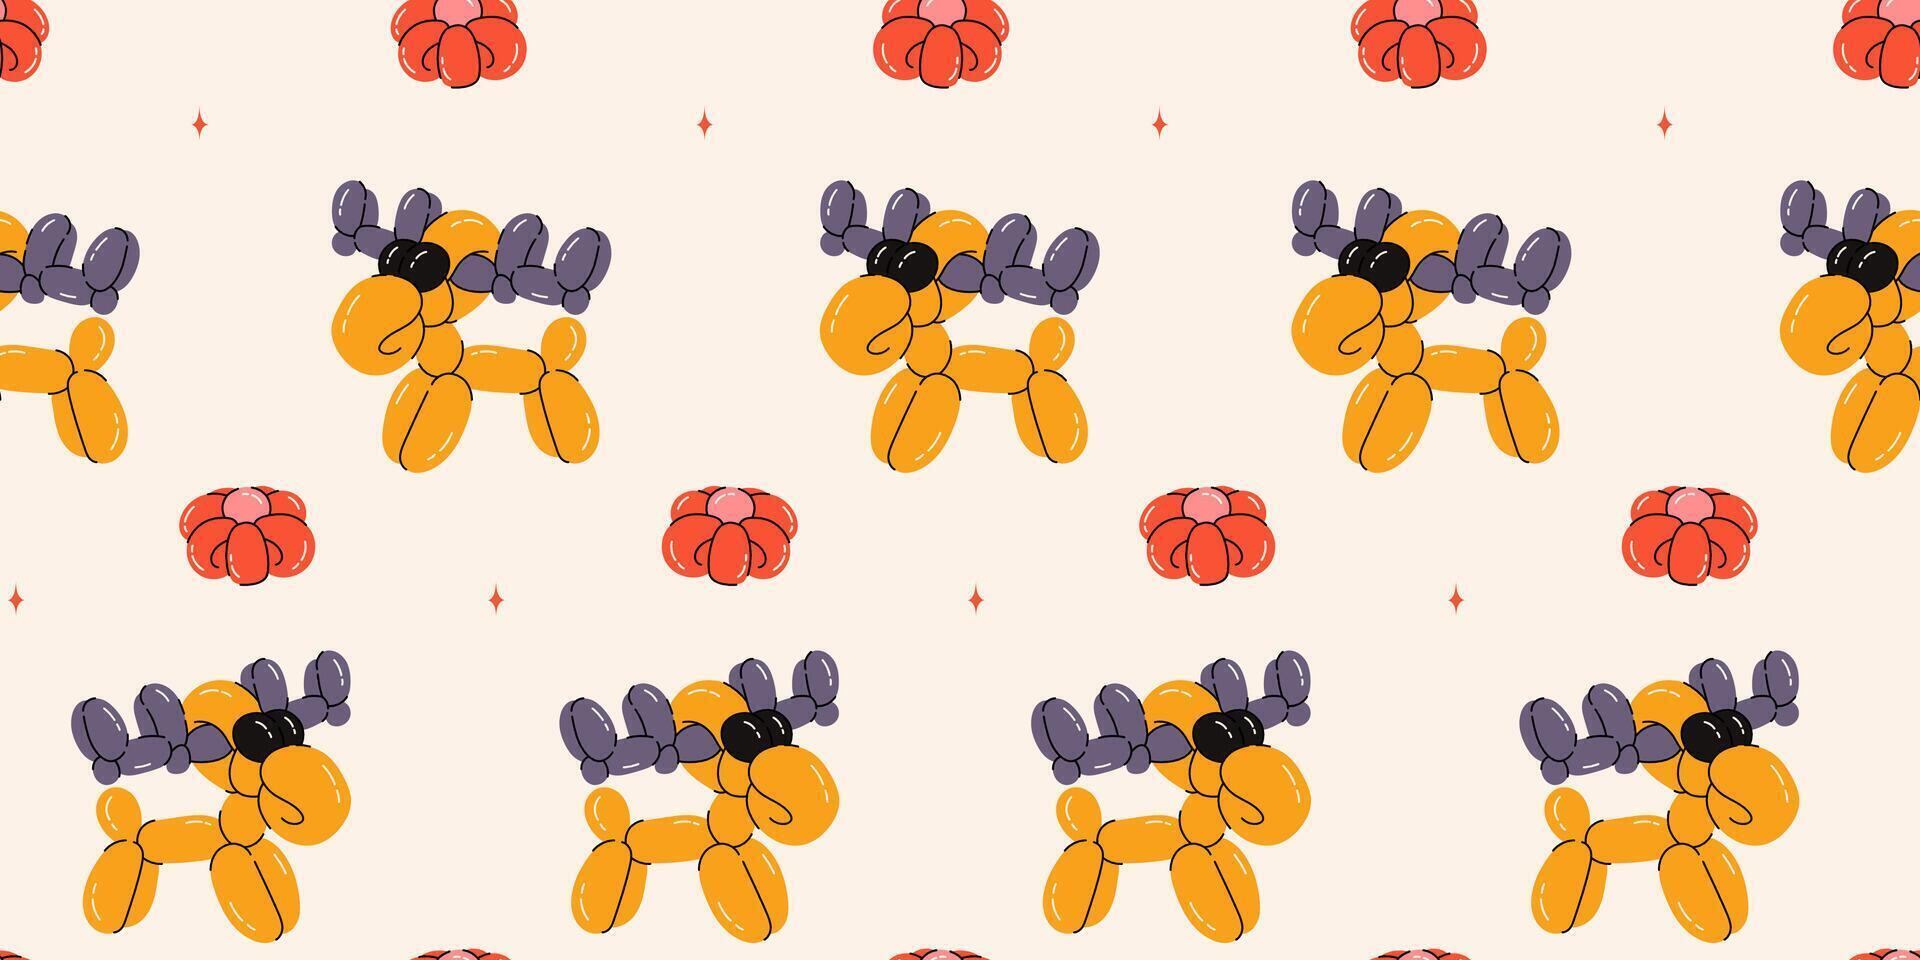 Seamless pattern with elk balloons. Bright colorful repeating elements. Stock illustration. Vector seamless pattern of cute cartoon bubble animal in color.